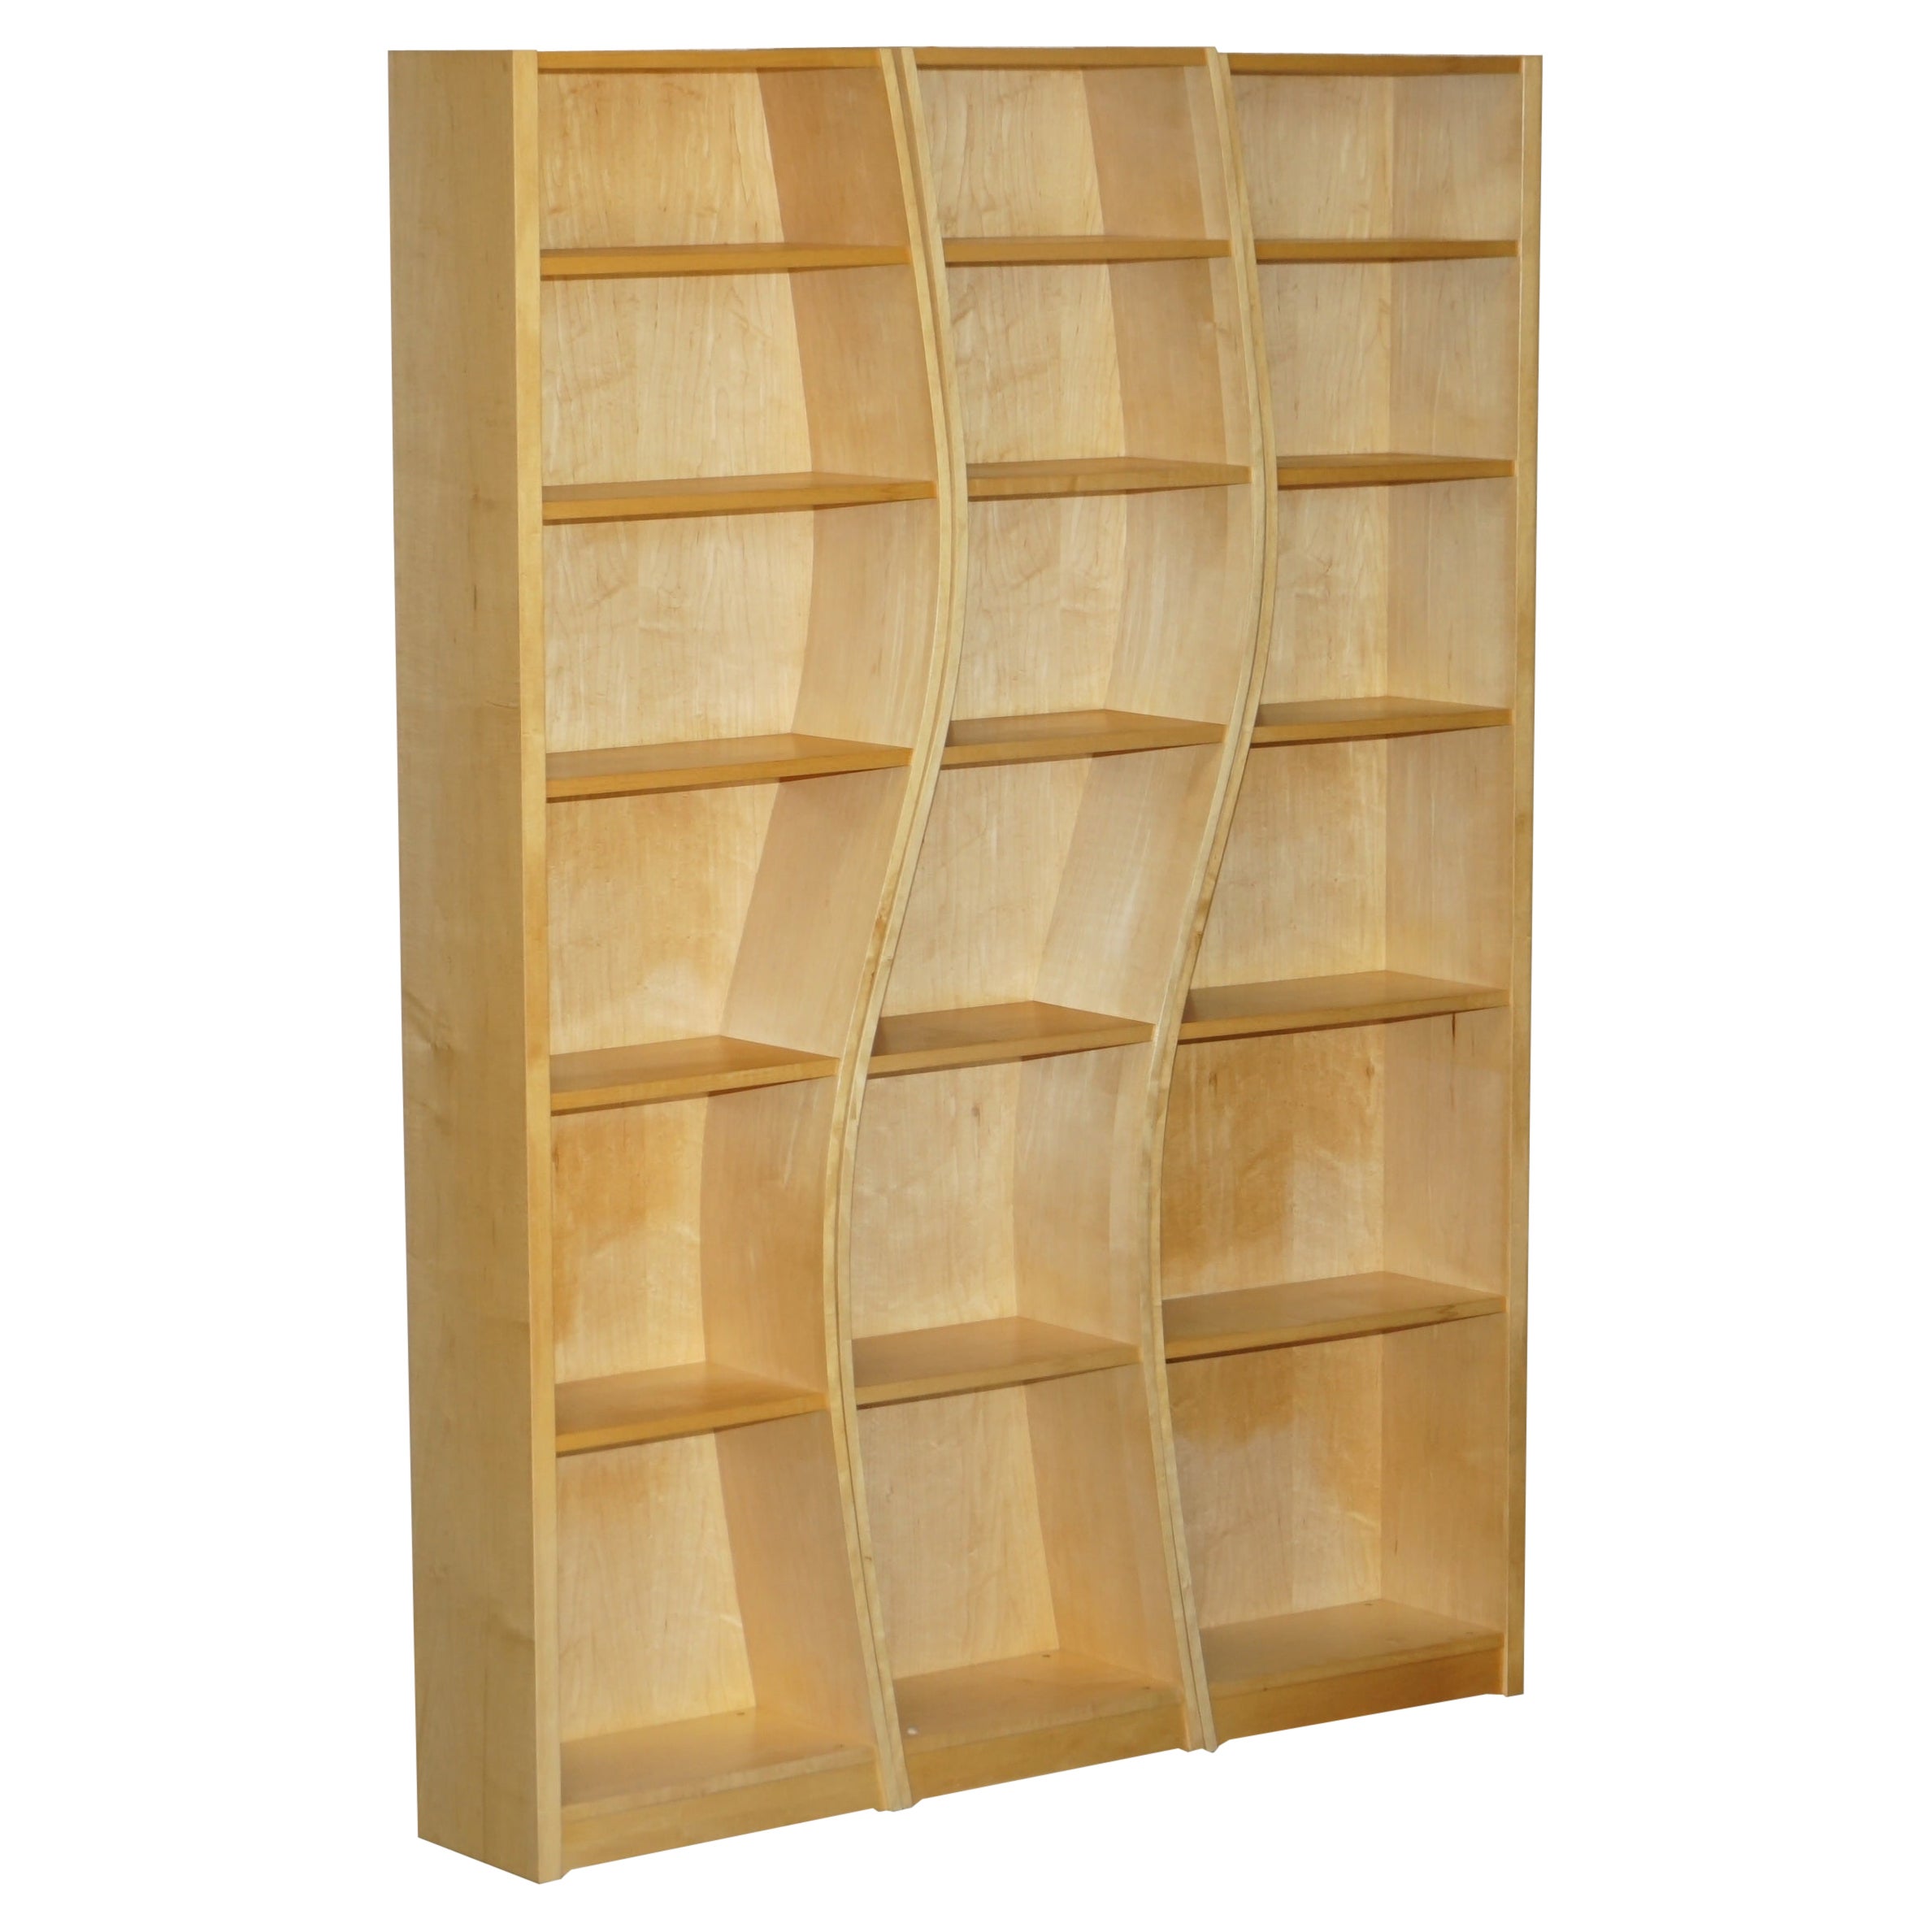 Three Section Very Cool Bendy Library Bookcases Must See Pictures in Birch For Sale